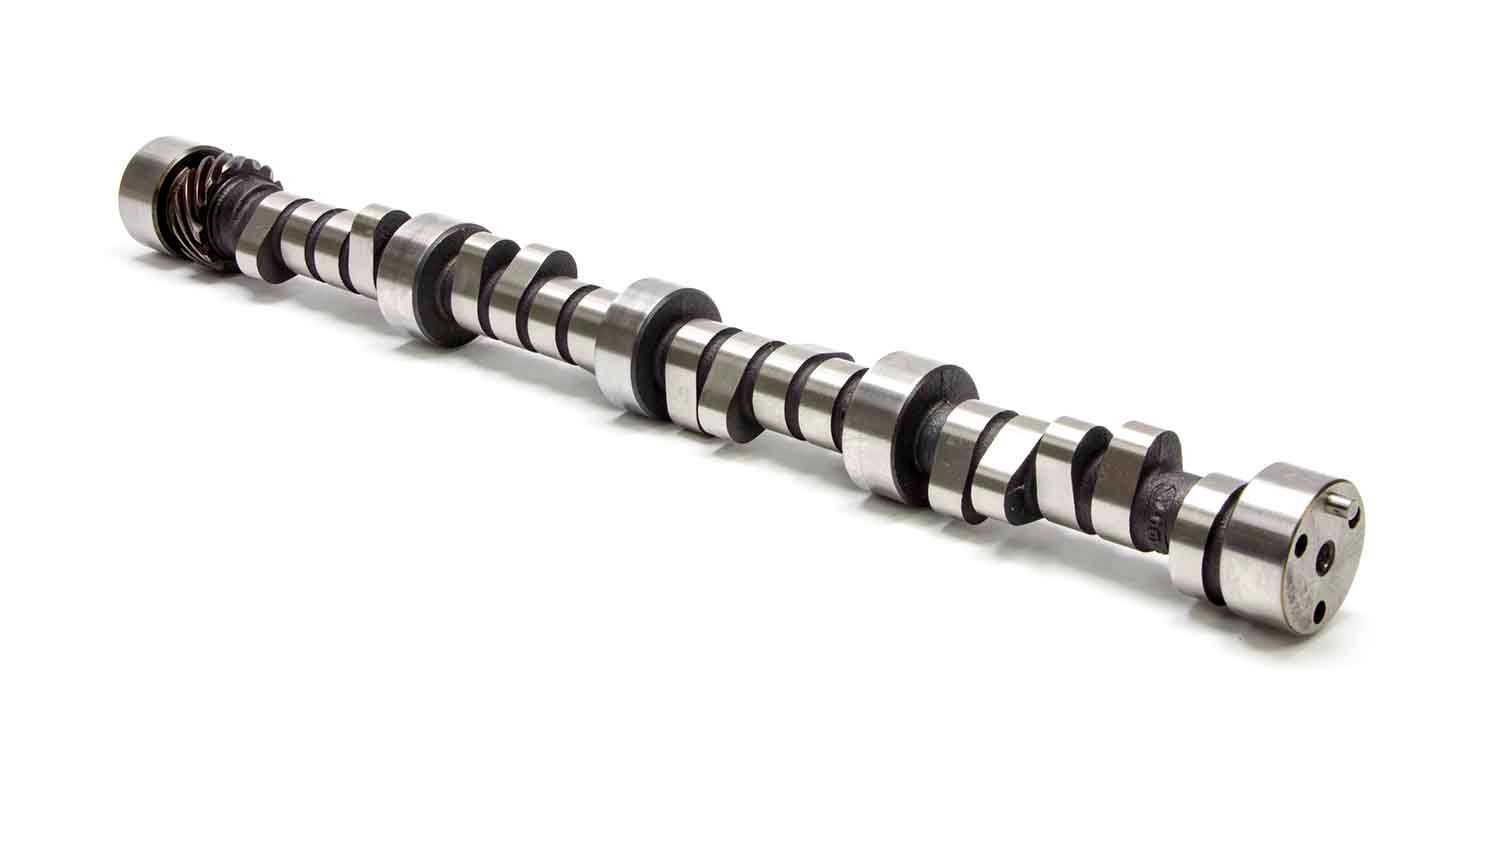 Lunati Cams 20120711 Camshaft, Voodoo Retro-Fit, Hydraulic Roller, Lift 0.515 / 0.530 in, Duration 270 / 278, 112 LSA, 1800 / 6000 RPM, Small Block Chevy, Each